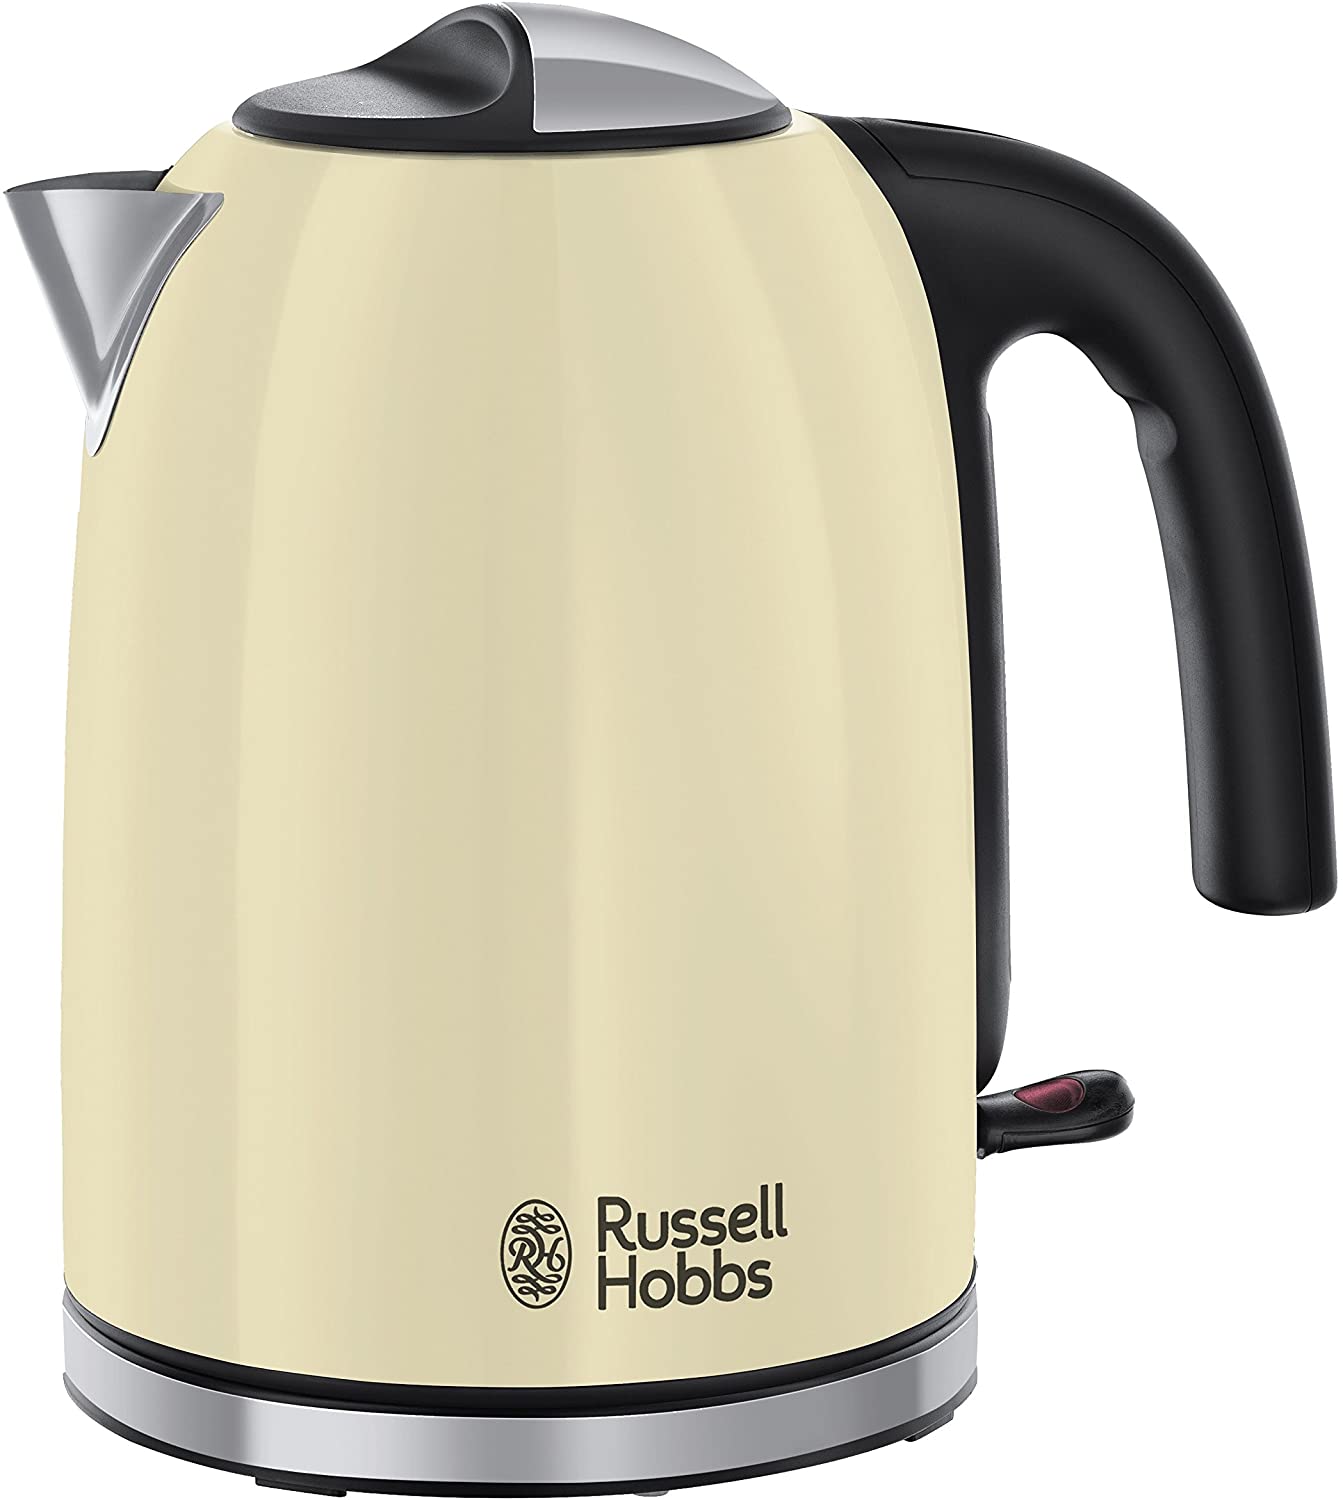 Russell Hobbs Kettle Colors + Creme, 1.7l, 2400W, quick cook function, optimized pouring spout, removable limescale filter, water level indicator, fill level indicator, tea maker 20415-70